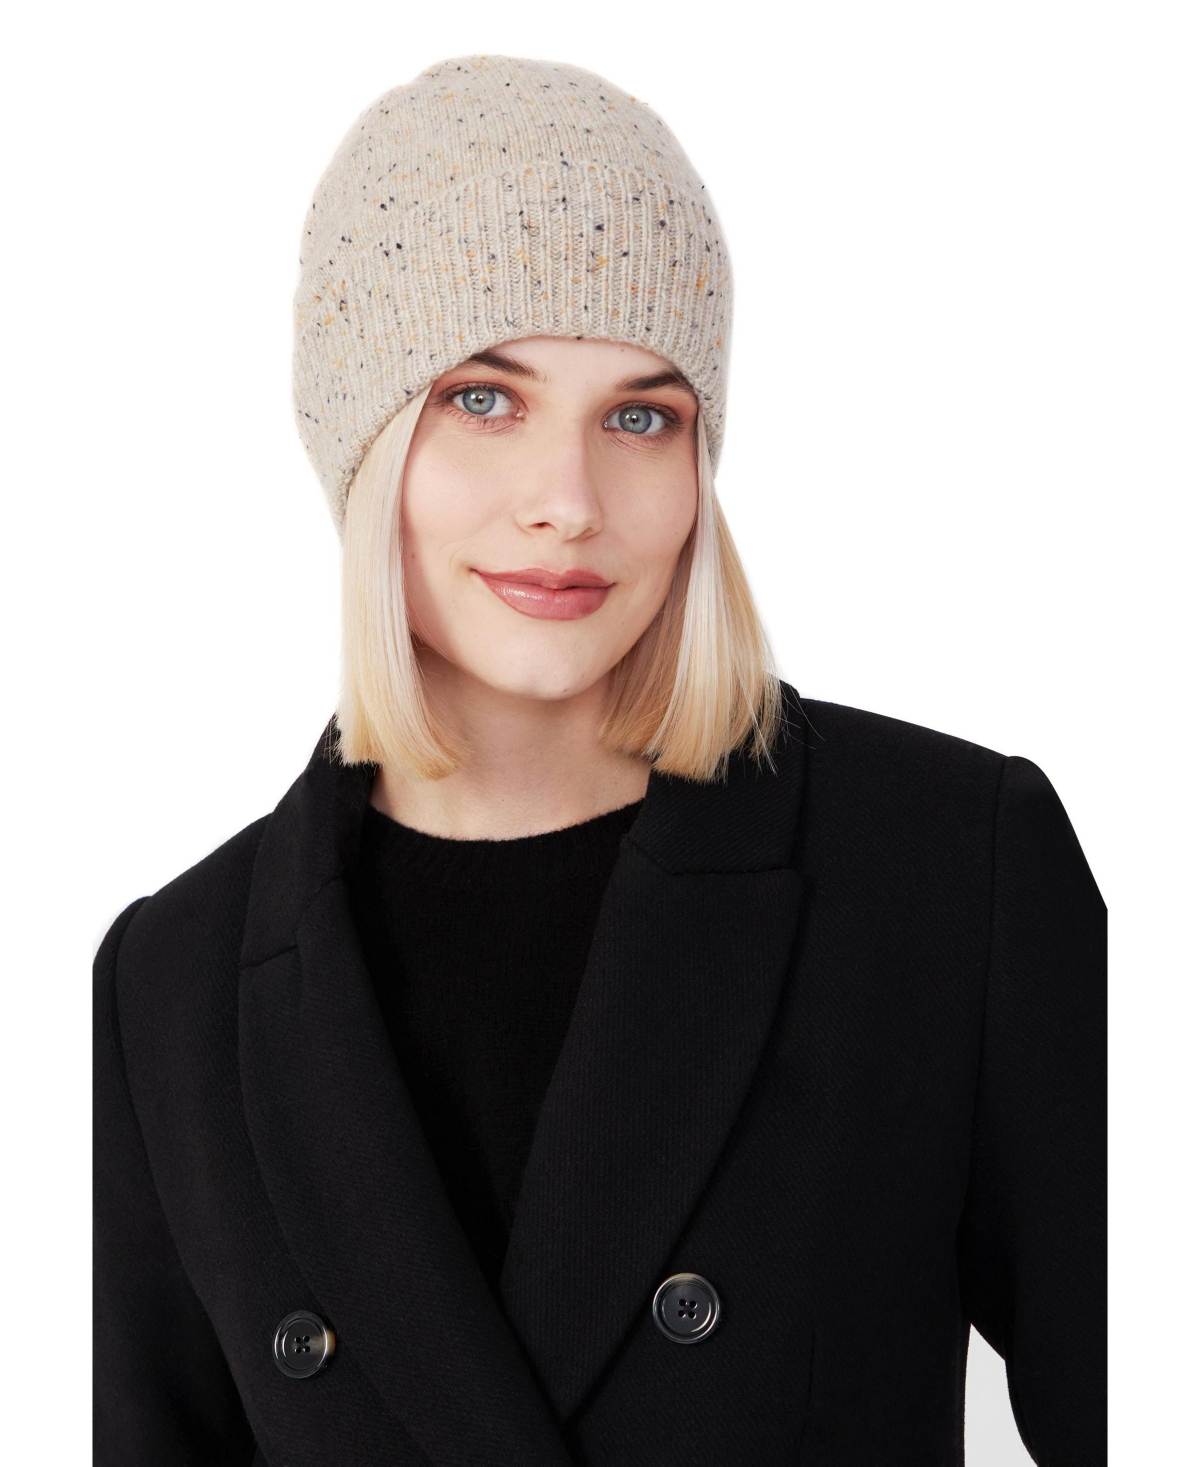 100% Pure Cashmere Women's Ribbed Cuff Beanie - Chocolate Brown